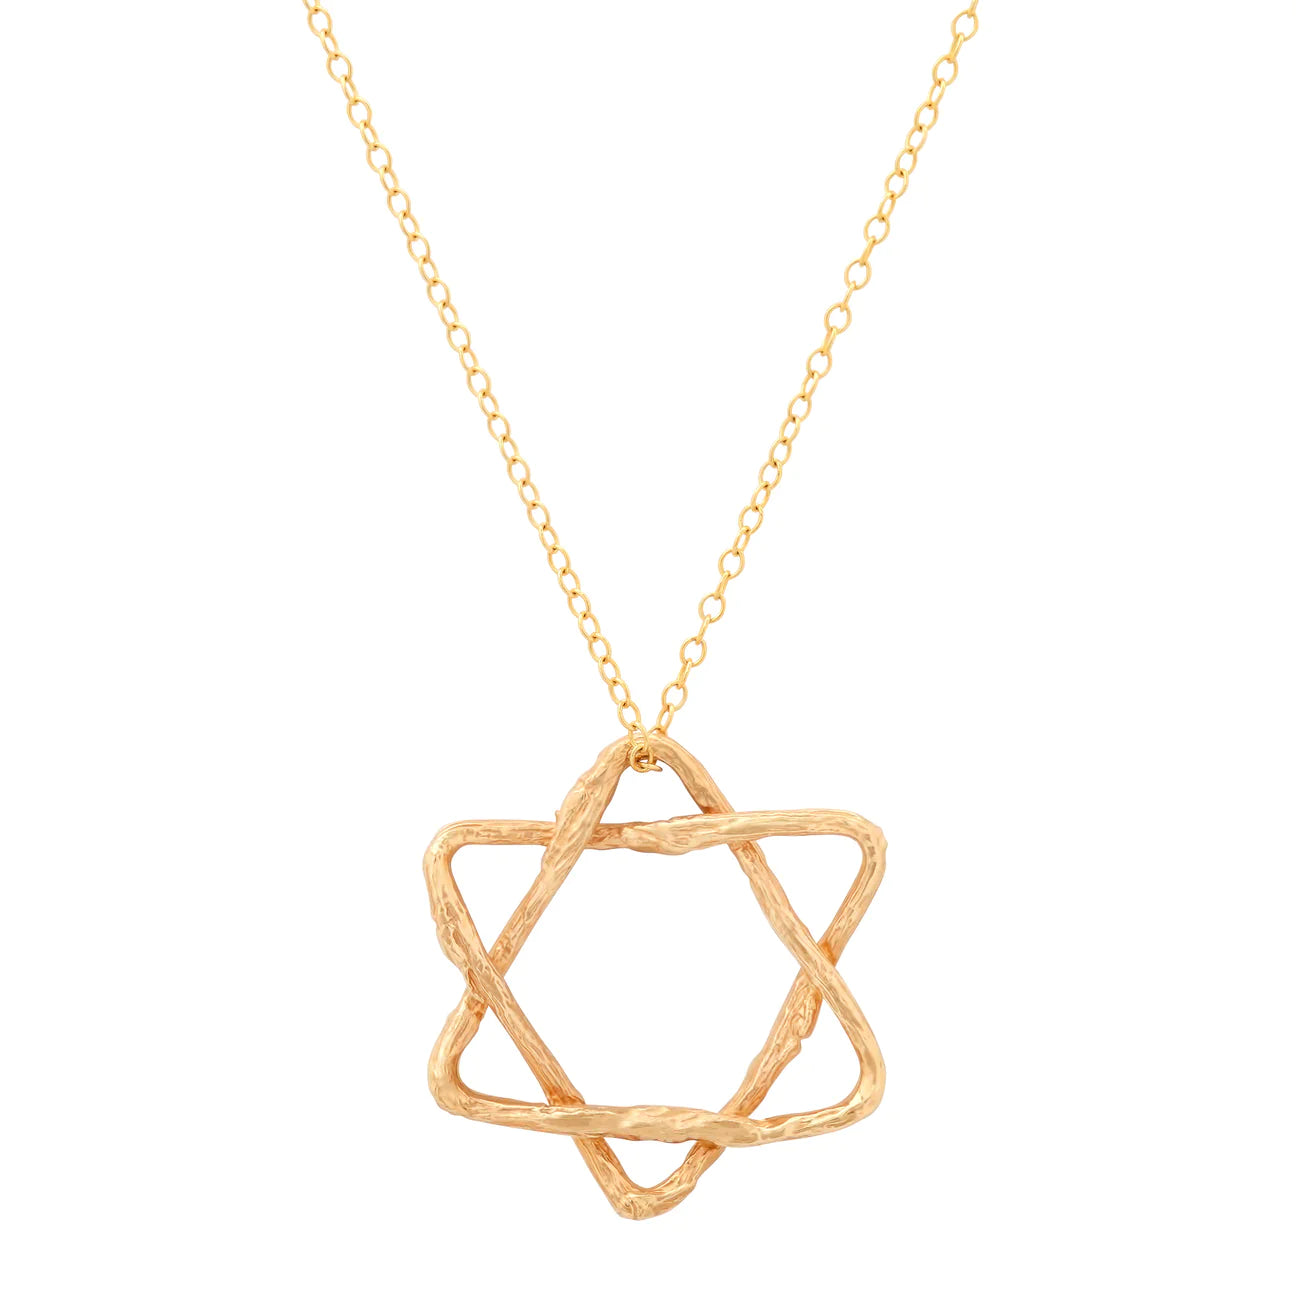 Star of David Necklace Pendant Elisabeth Bell Jewelry Large Yellow Gold Plain